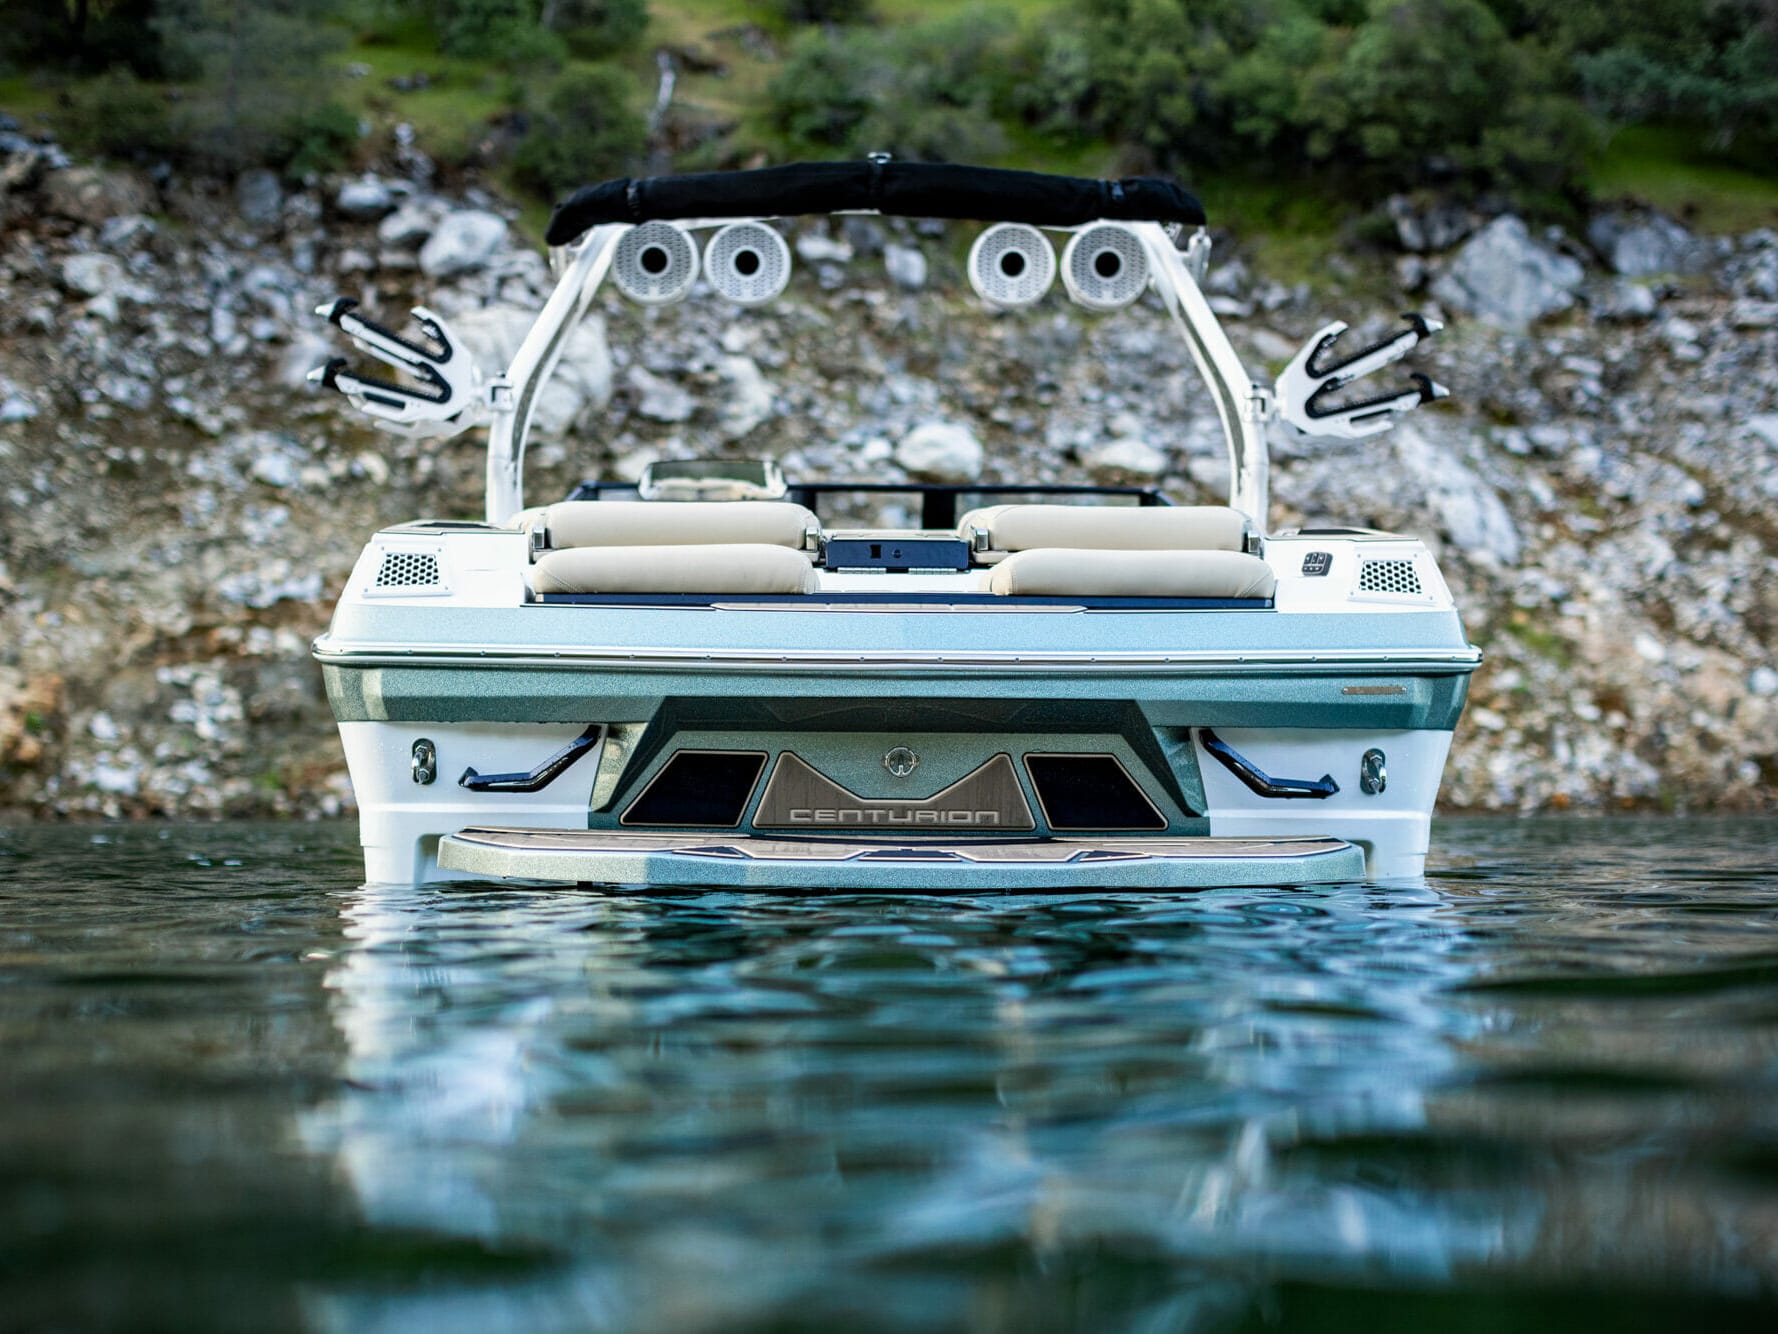 A white wakesurf boat is floating in a body of water.